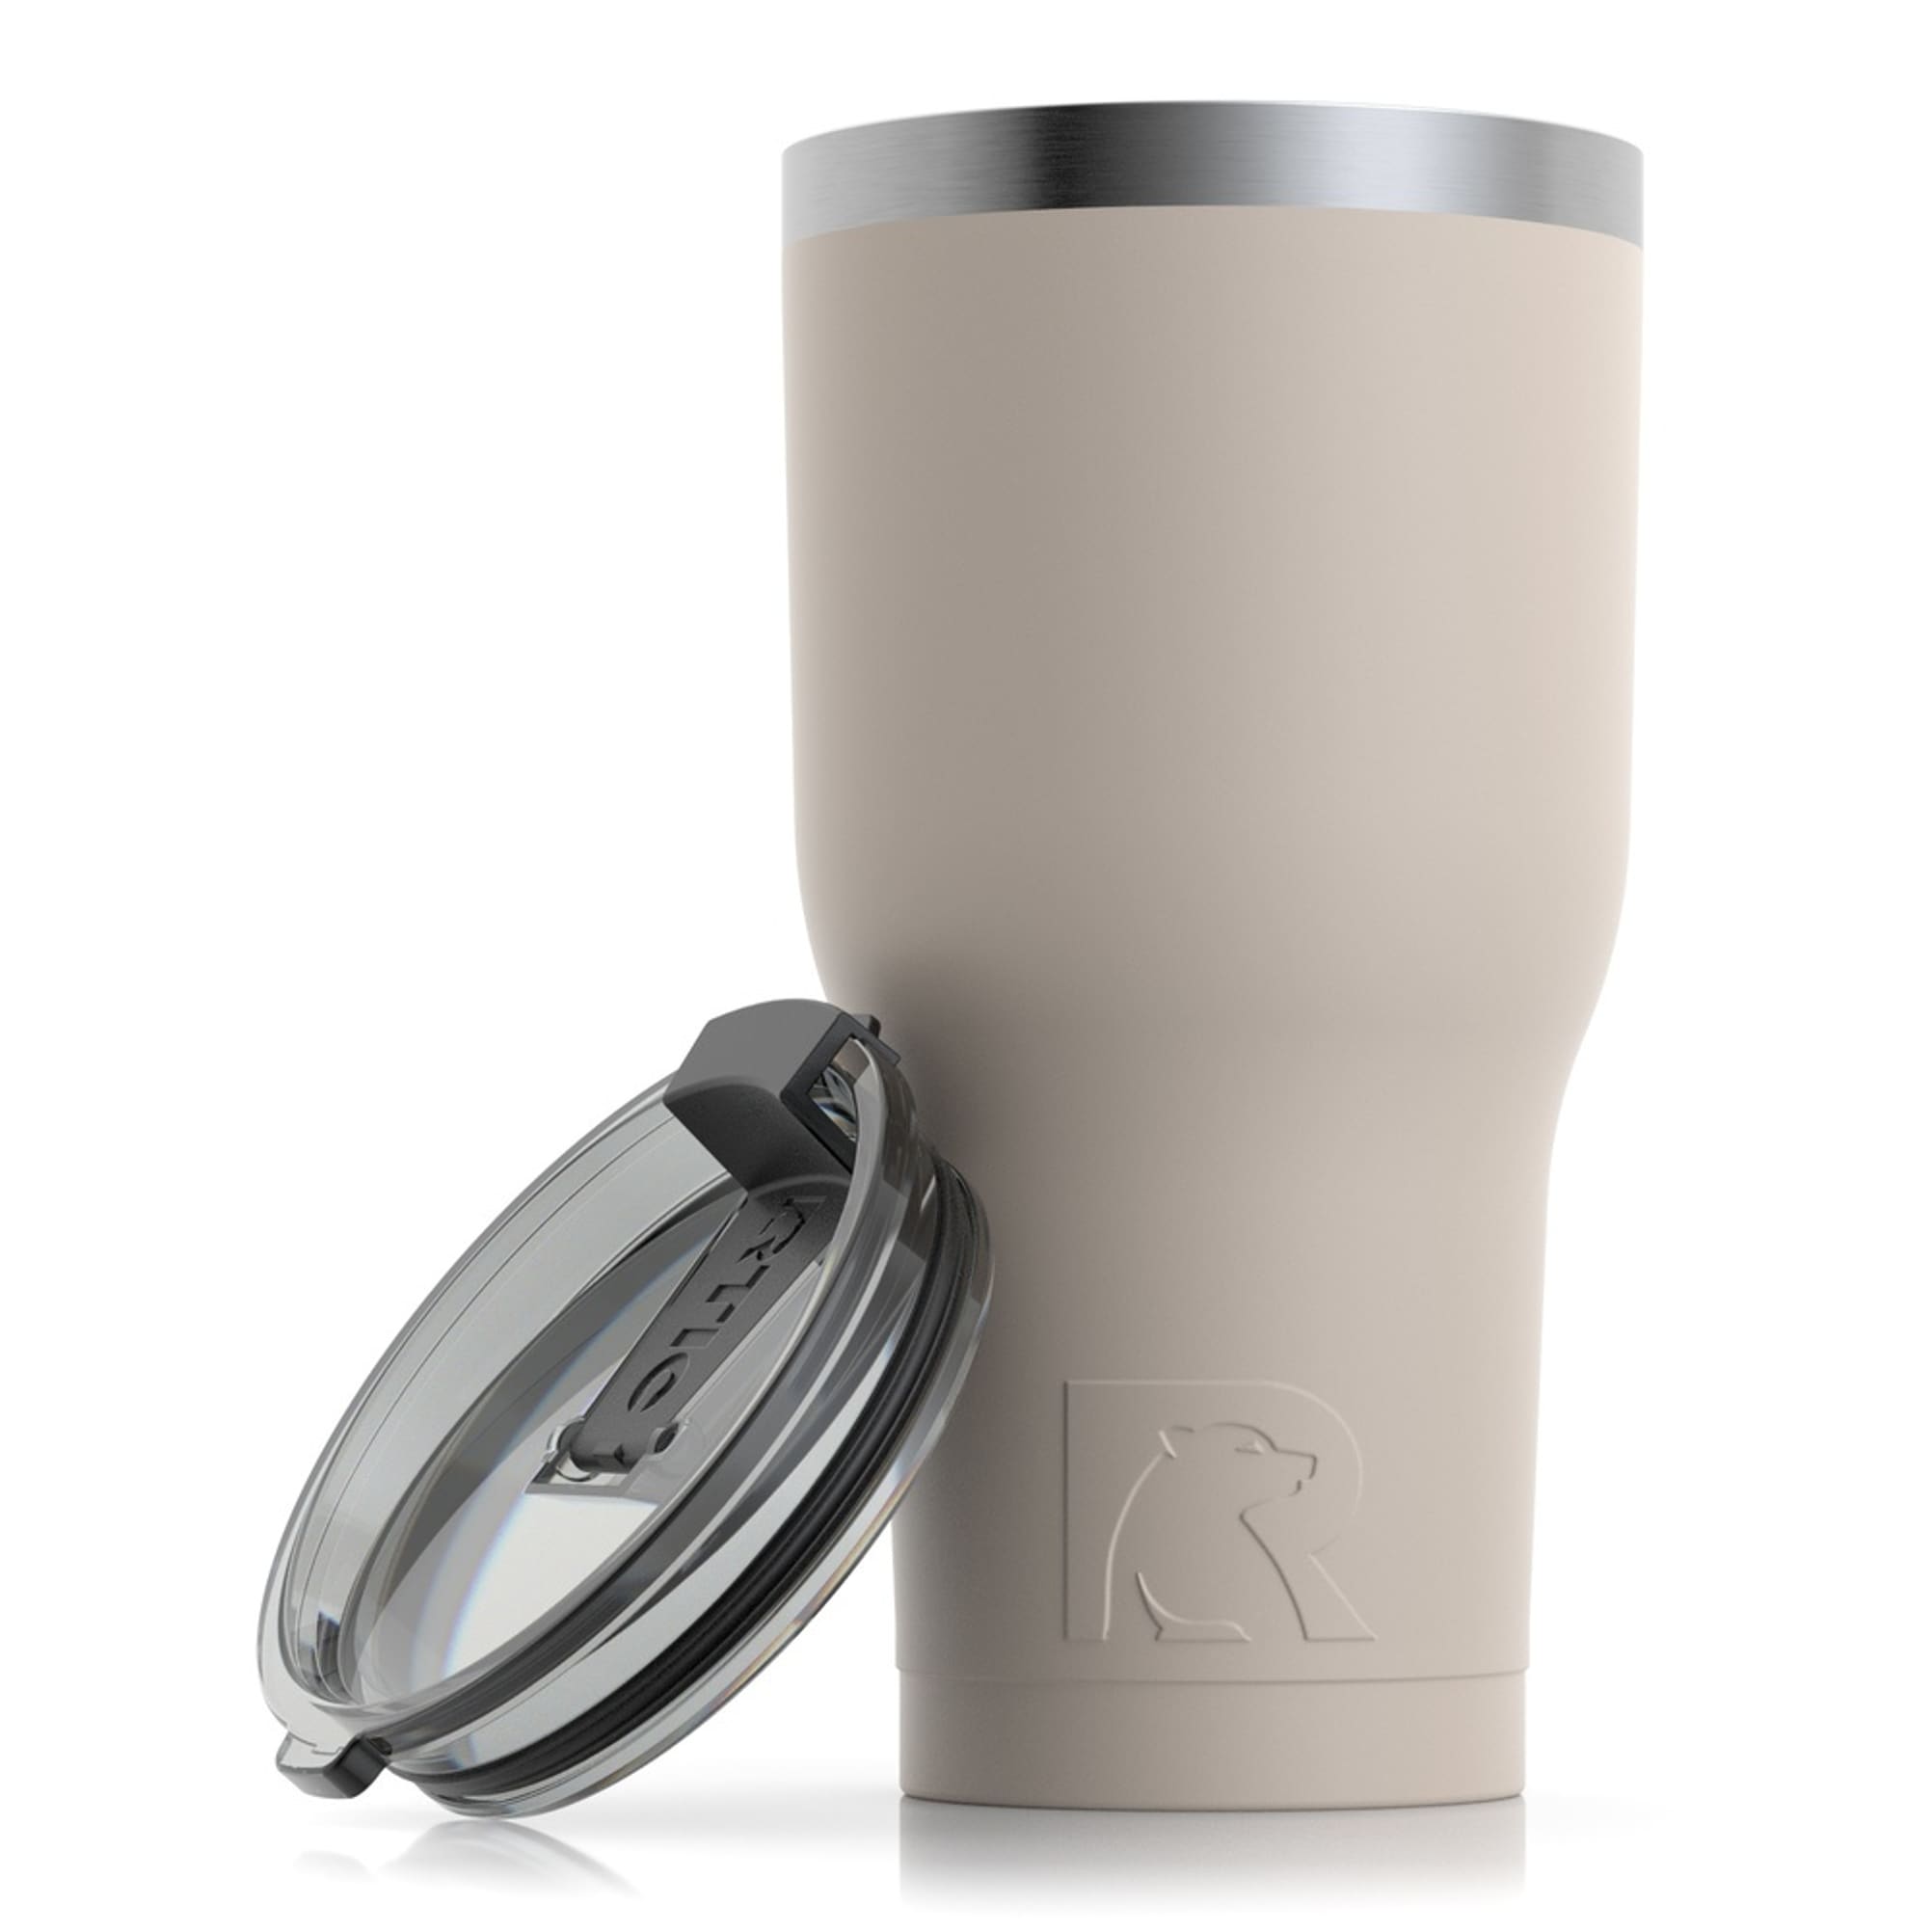 RTIC　Tumbler　Bottles　Stainless　Insulated　Mugs　the　30-fl　Outdoors　in　department　Steel　oz　Water　Tumbler　at